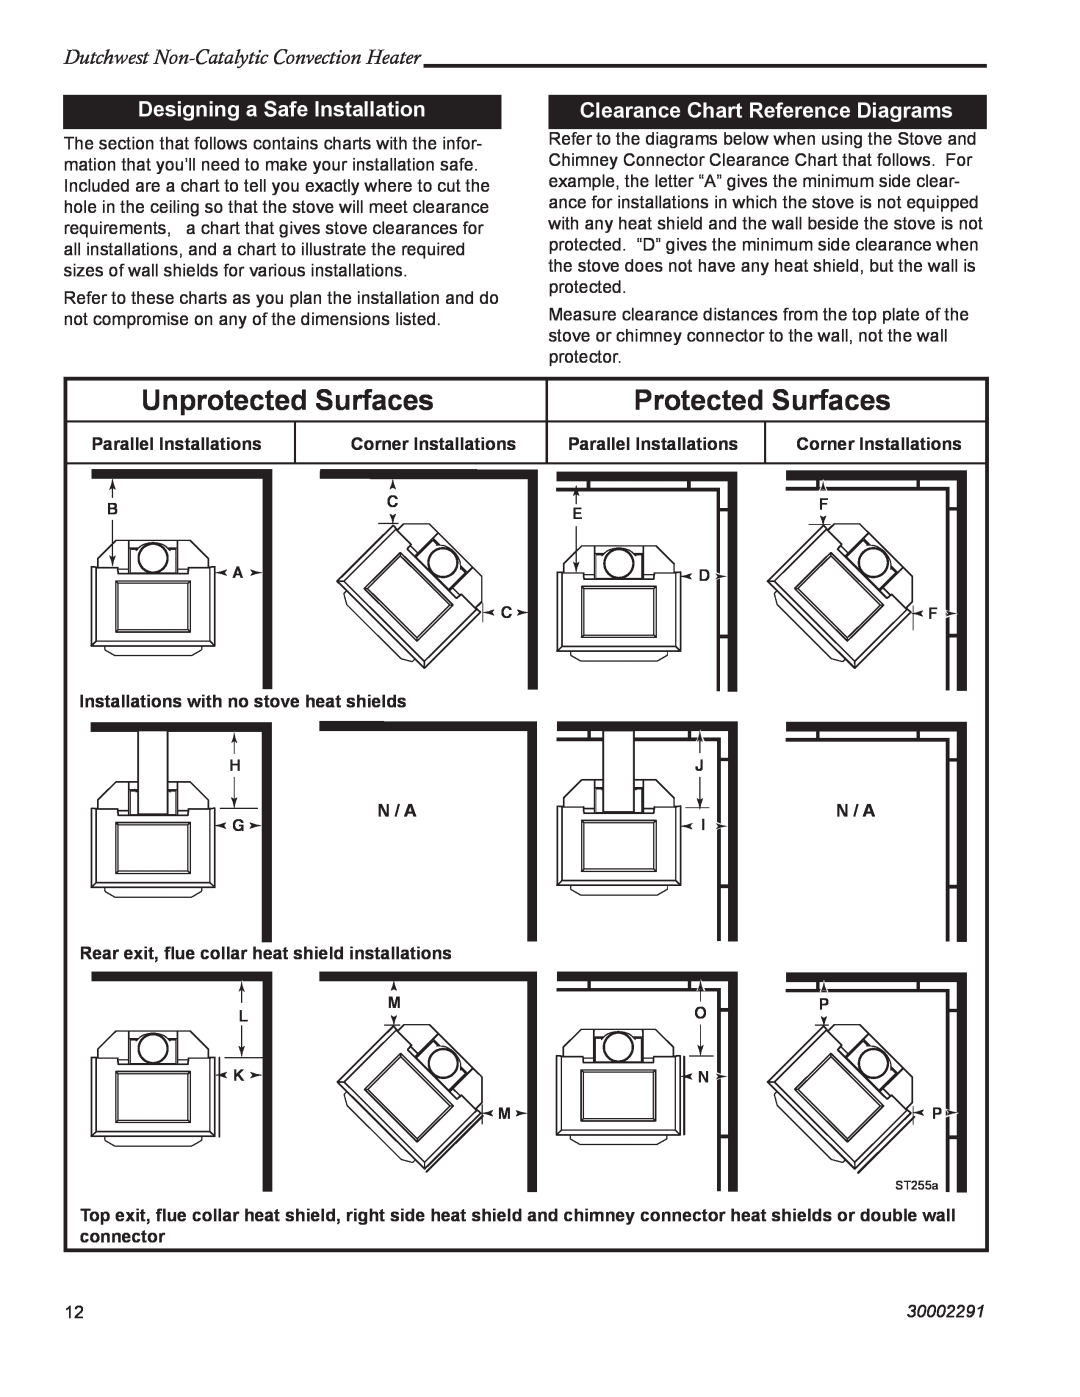 Vermont Casting 2479 Designing a Safe Installation, Clearance Chart Reference Diagrams, Unprotected Surfaces, 30002291 